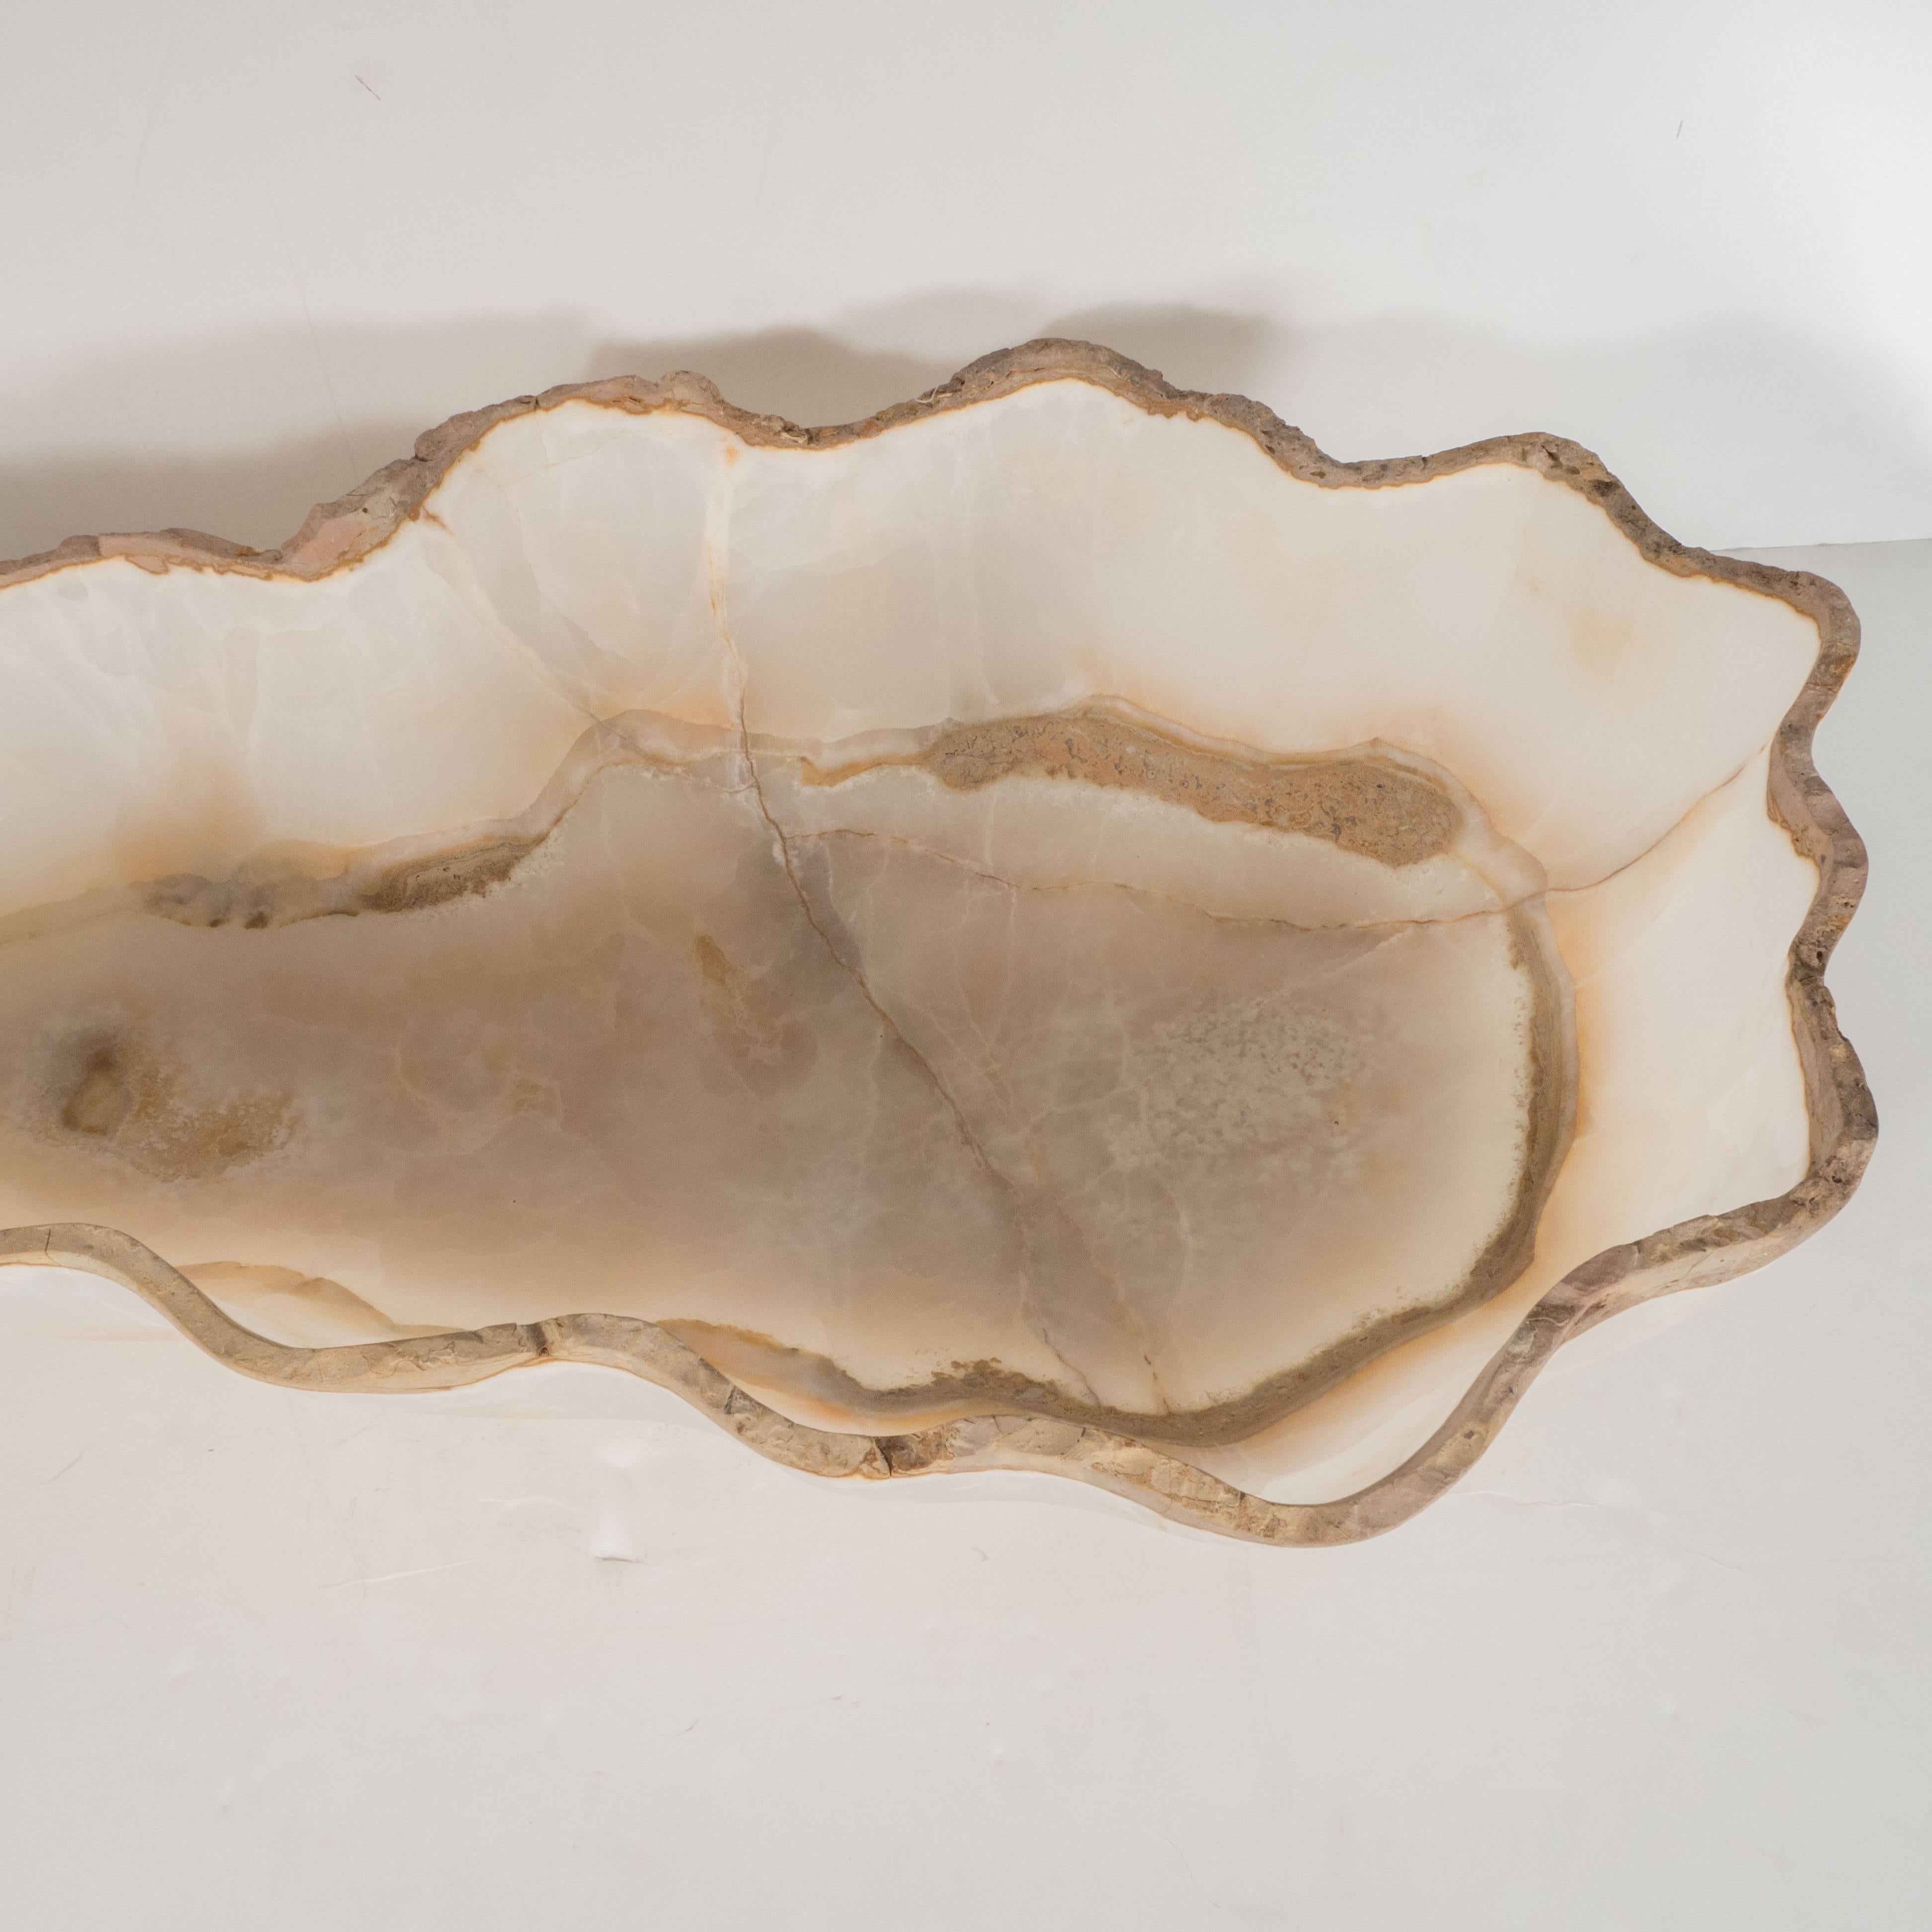 Brazilian Organic Modern Agate Bowl in Sand and Oyster Shell Hues